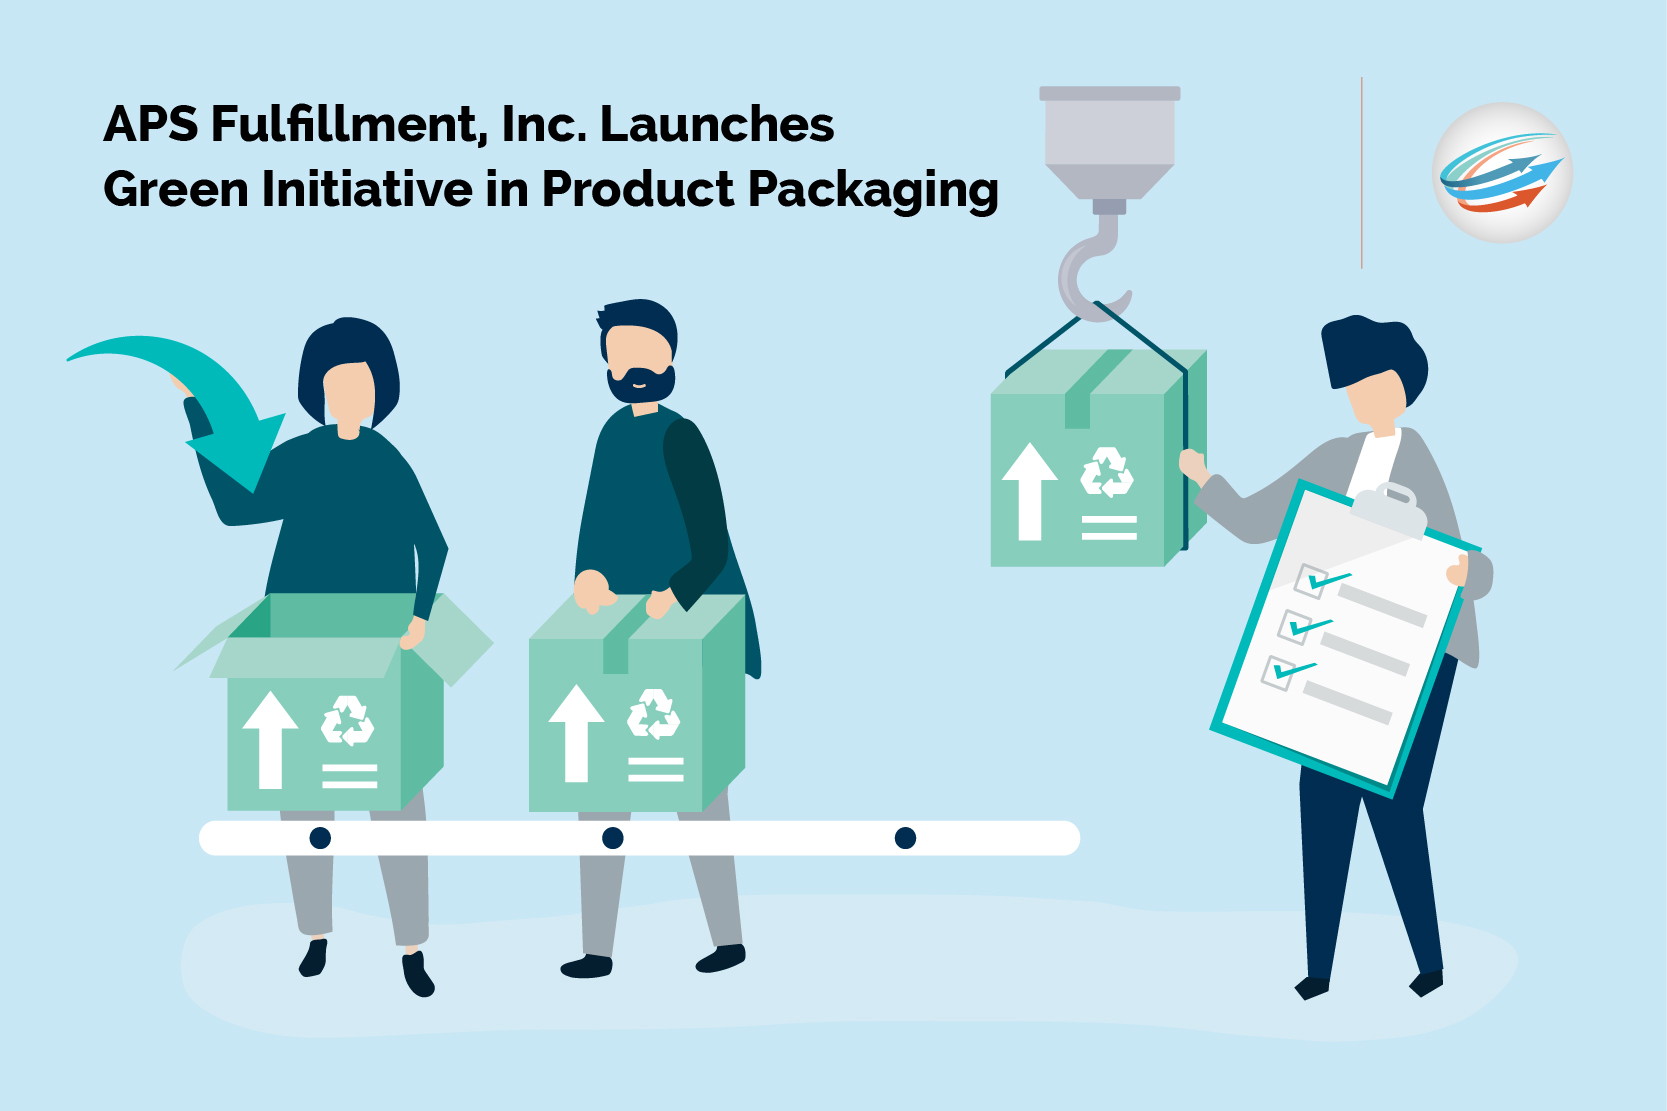 APS Fulfillment, Inc. Launches Green Initiative in Product Packaging